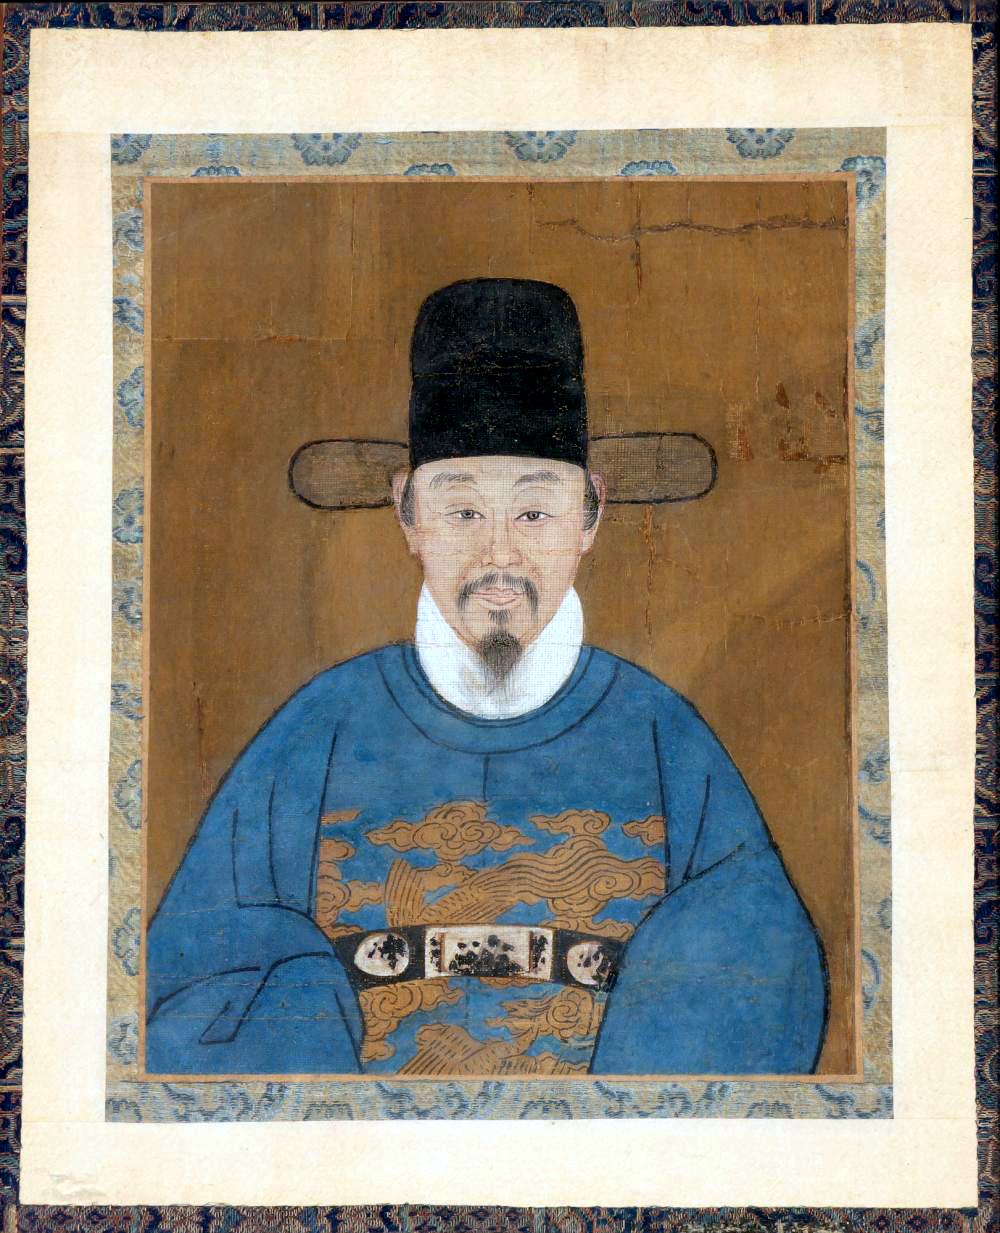 A hyper realistic portrait of an official with watercolor on silk bordered panel, framed in dark wood, from Korean late Joseon dynasty, circa 19th century. The beard man sitting with a formal frontal view, displays a benevolent facial expression, in